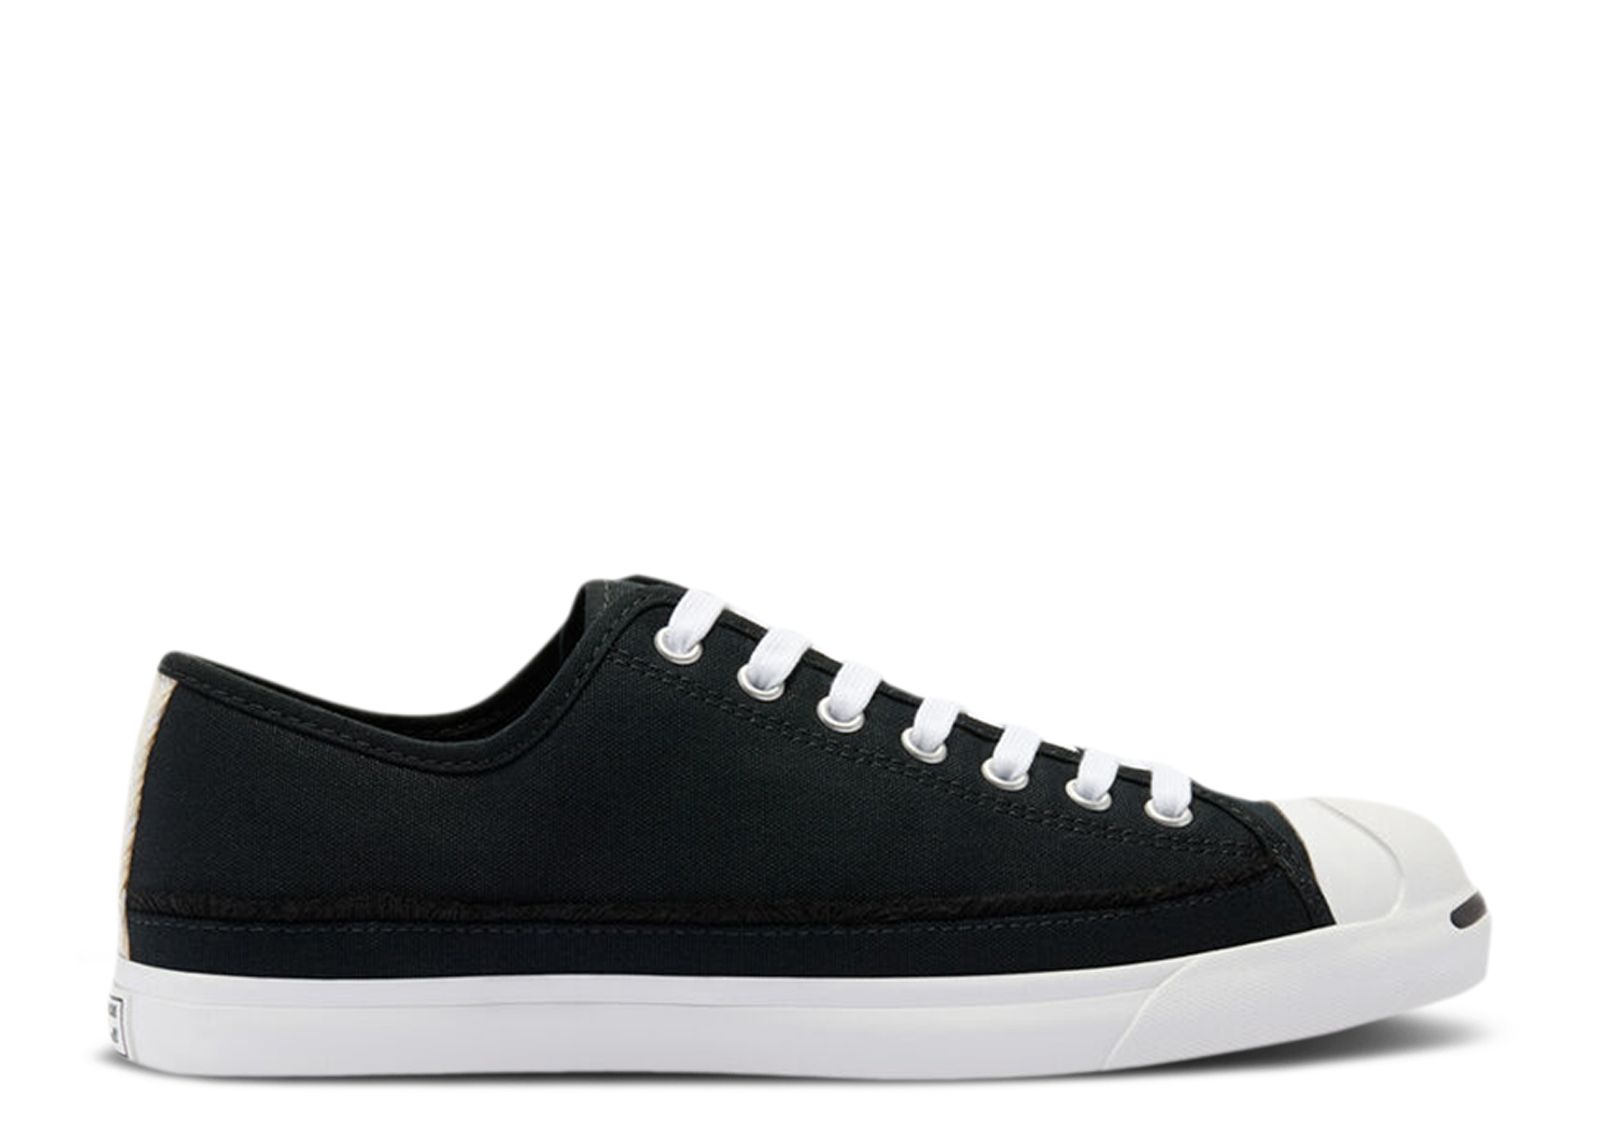 Jack Purcell Low 'Trail To Cove' - Converse - 168138C - black/white ...